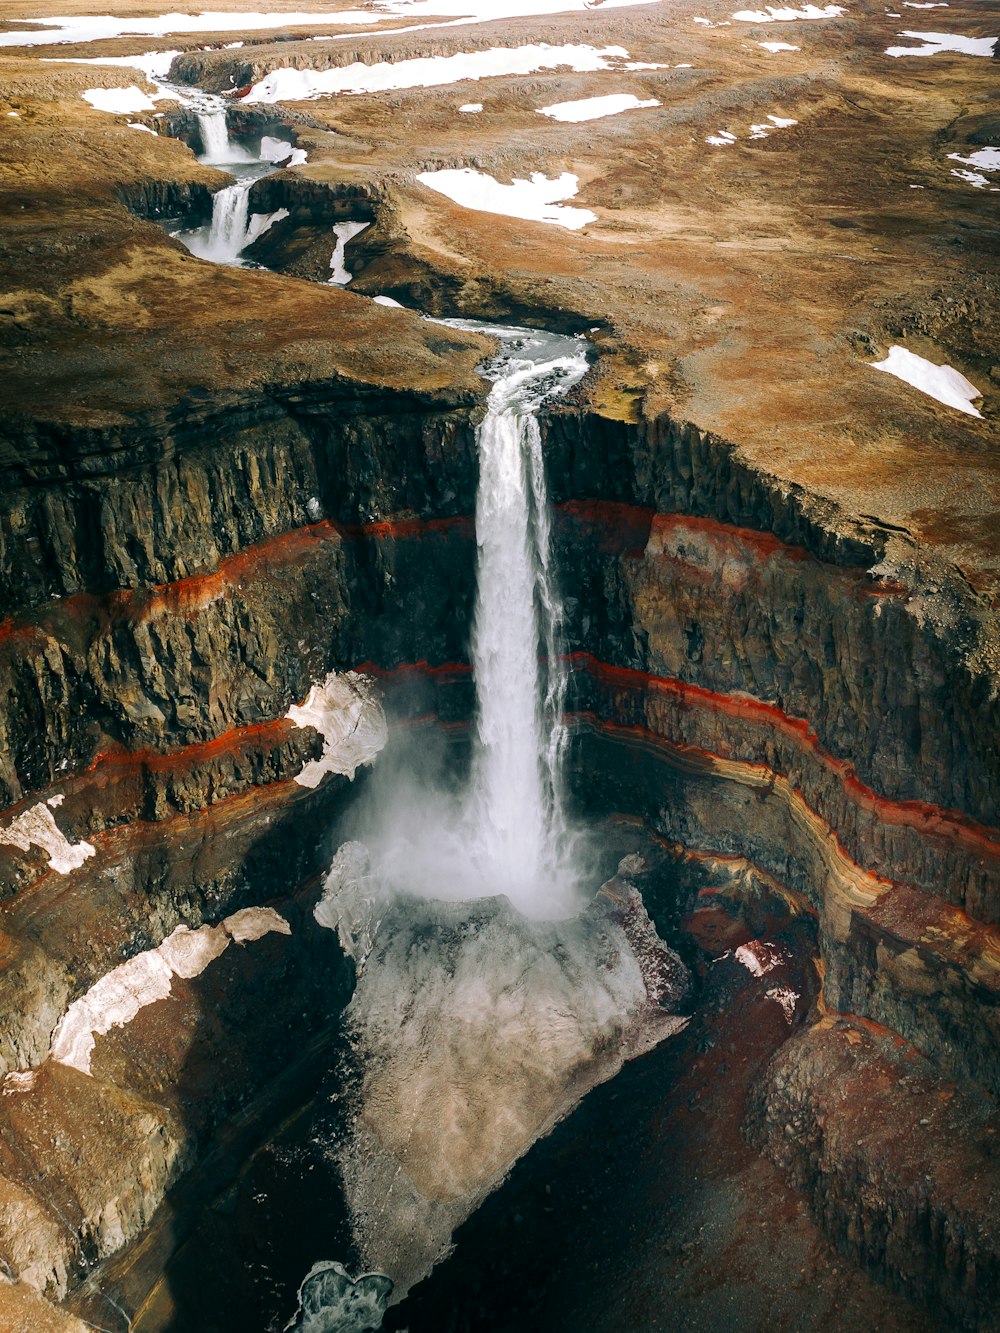 water falls on brown rocky mountain during daytime